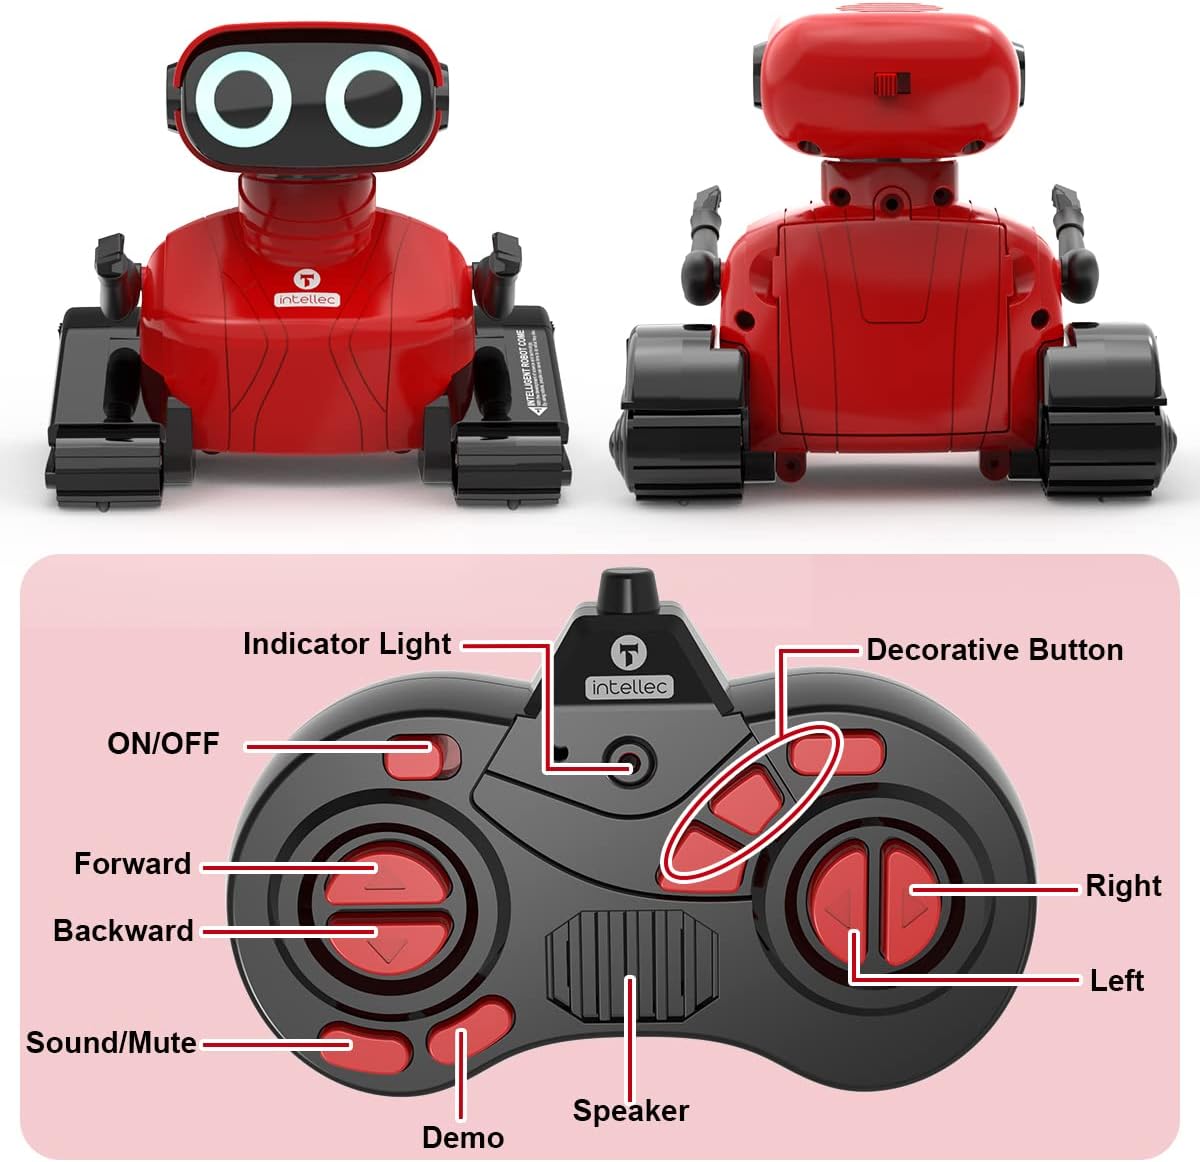 GILOBABY Robot Toys, Remote Control Robot Toy, RC Robots for Kids with LED Eyes, Flexible Head & Arms, Dance Moves and Music, Birthday Gifts for Girls Ages 3+ Years (Red)